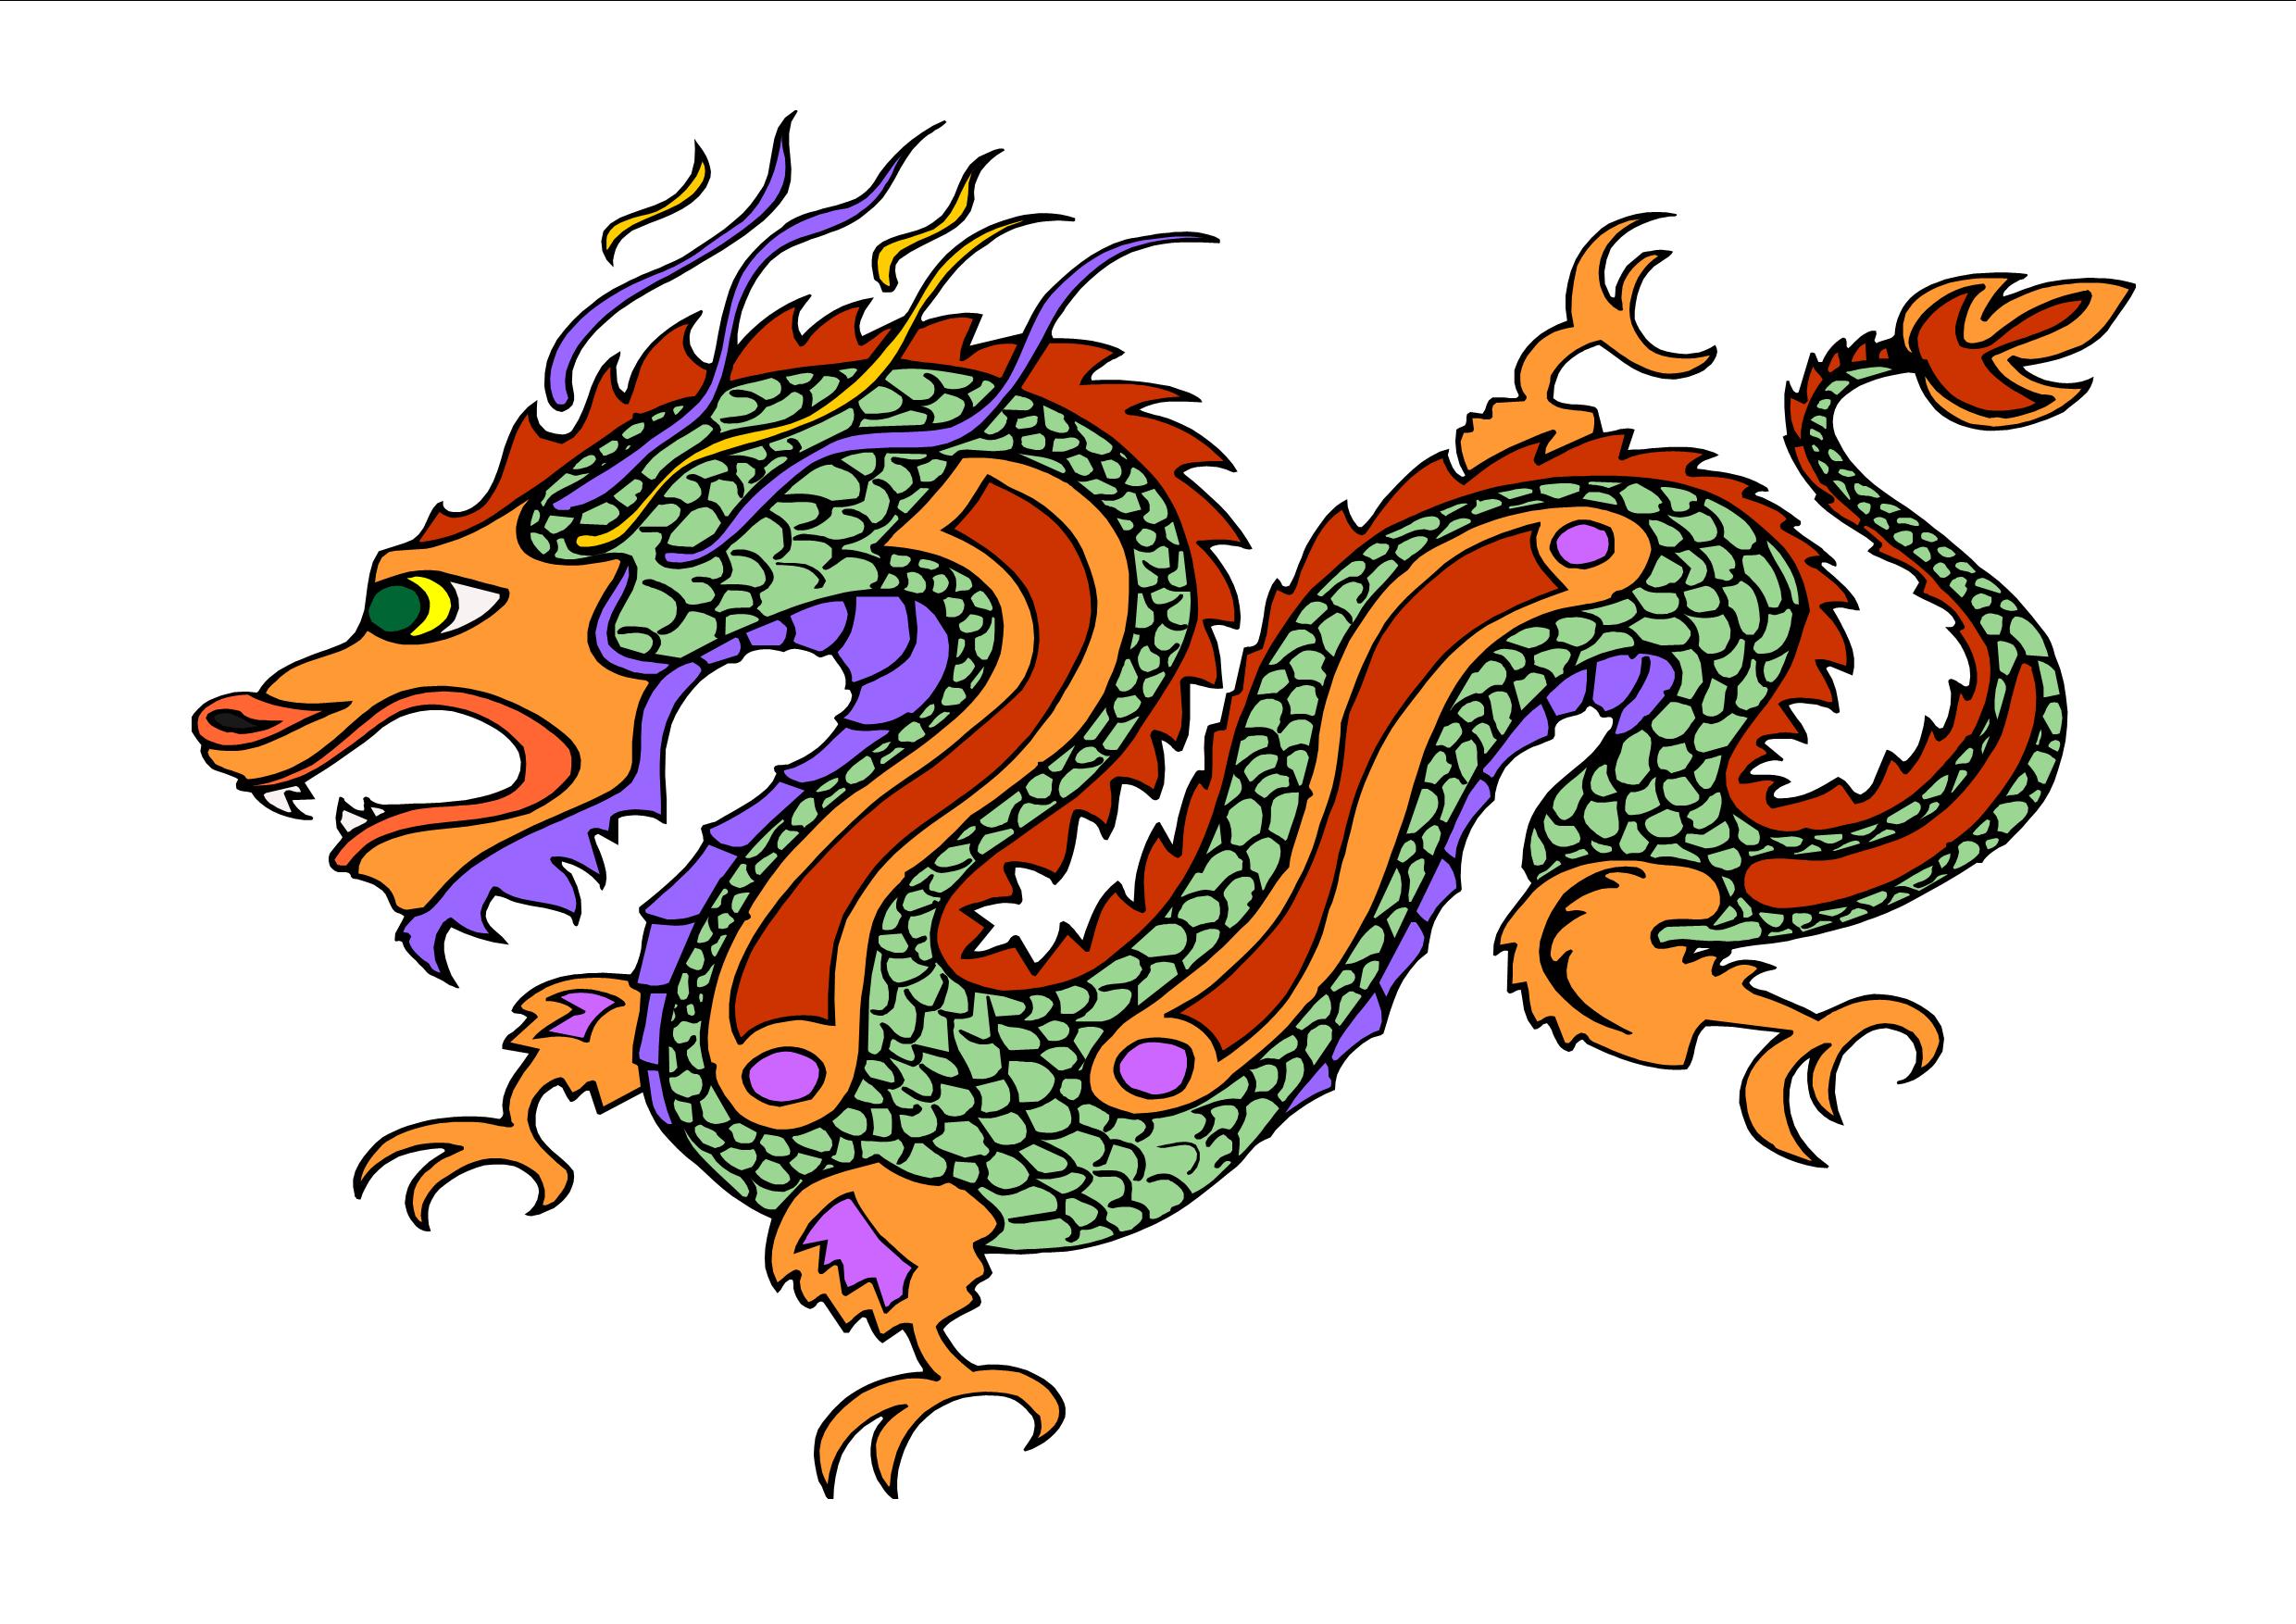 Dragon Images For Kids - Cliparts.co